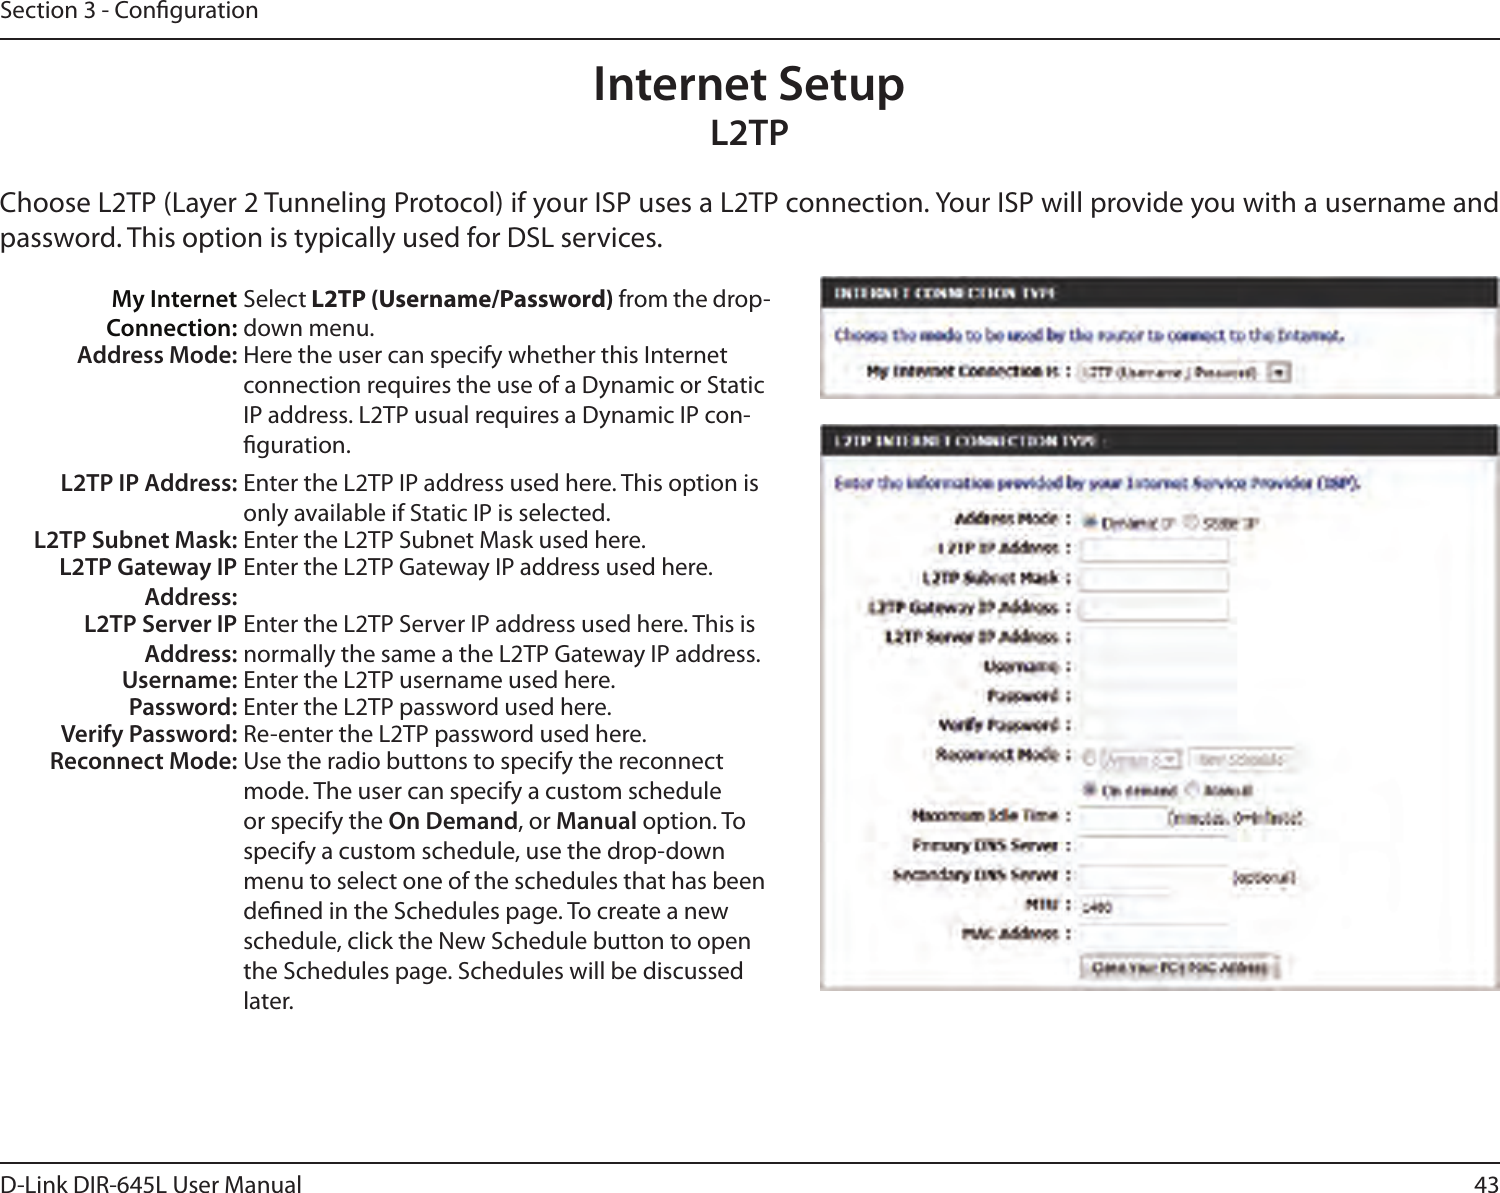 43D-Link DIR-645L User ManualSection 3 - CongurationInternet SetupL2TPChoose L2TP (Layer 2 Tunneling Protocol) if your ISP uses a L2TP connection. Your ISP will provide you with a username and password. This option is typically used for DSL services. My Internet Connection:Select L2TP (Username/Password) from the drop-down menu.Address Mode: Here the user can specify whether this Internet connection requires the use of a Dynamic or Static IP address. L2TP usual requires a Dynamic IP con-guration.L2TP IP Address: Enter the L2TP IP address used here. This option is only available if Static IP is selected.L2TP Subnet Mask: Enter the L2TP Subnet Mask used here.L2TP Gateway IP Address:Enter the L2TP Gateway IP address used here.L2TP Server IP Address:Enter the L2TP Server IP address used here. This is normally the same a the L2TP Gateway IP address.Username: Enter the L2TP username used here.Password: Enter the L2TP password used here.Verify Password: Re-enter the L2TP password used here.Reconnect Mode: Use the radio buttons to specify the reconnect mode. The user can specify a custom schedule or specify the On Demand, or Manual option. To specify a custom schedule, use the drop-down menu to select one of the schedules that has been dened in the Schedules page. To create a new schedule, click the New Schedule button to open the Schedules page. Schedules will be discussed later.